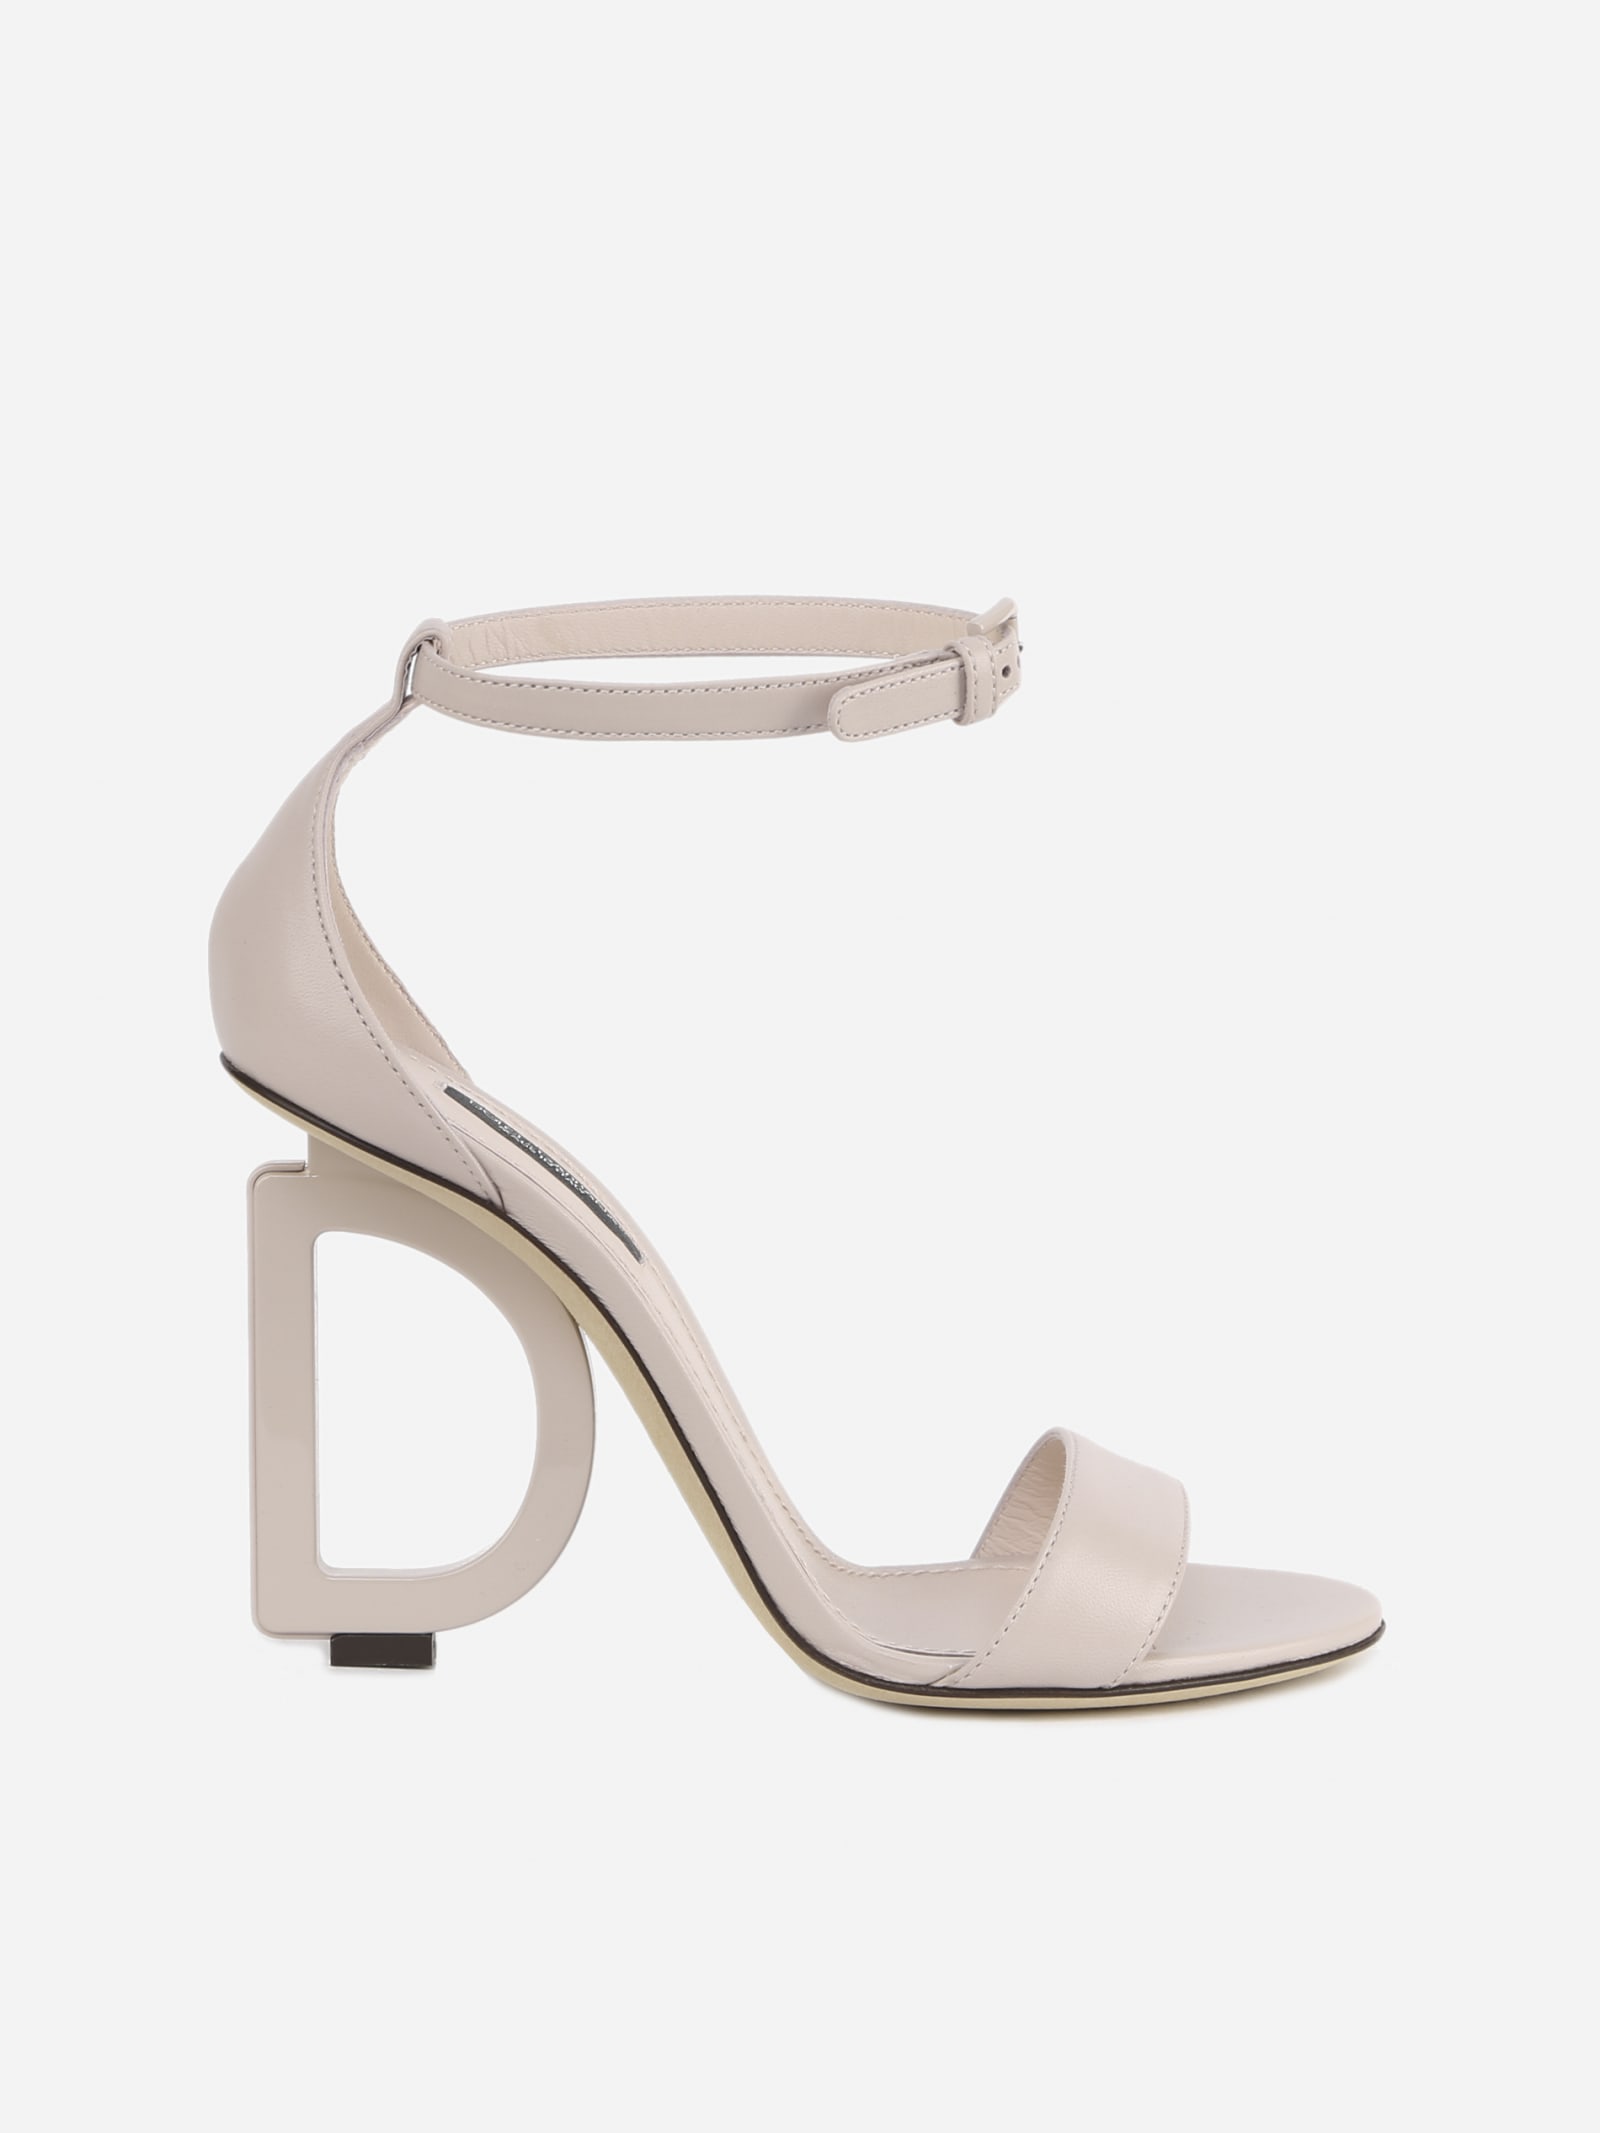 Dolce & Gabbana Patent Leather Sandals With Dg Logo Heel